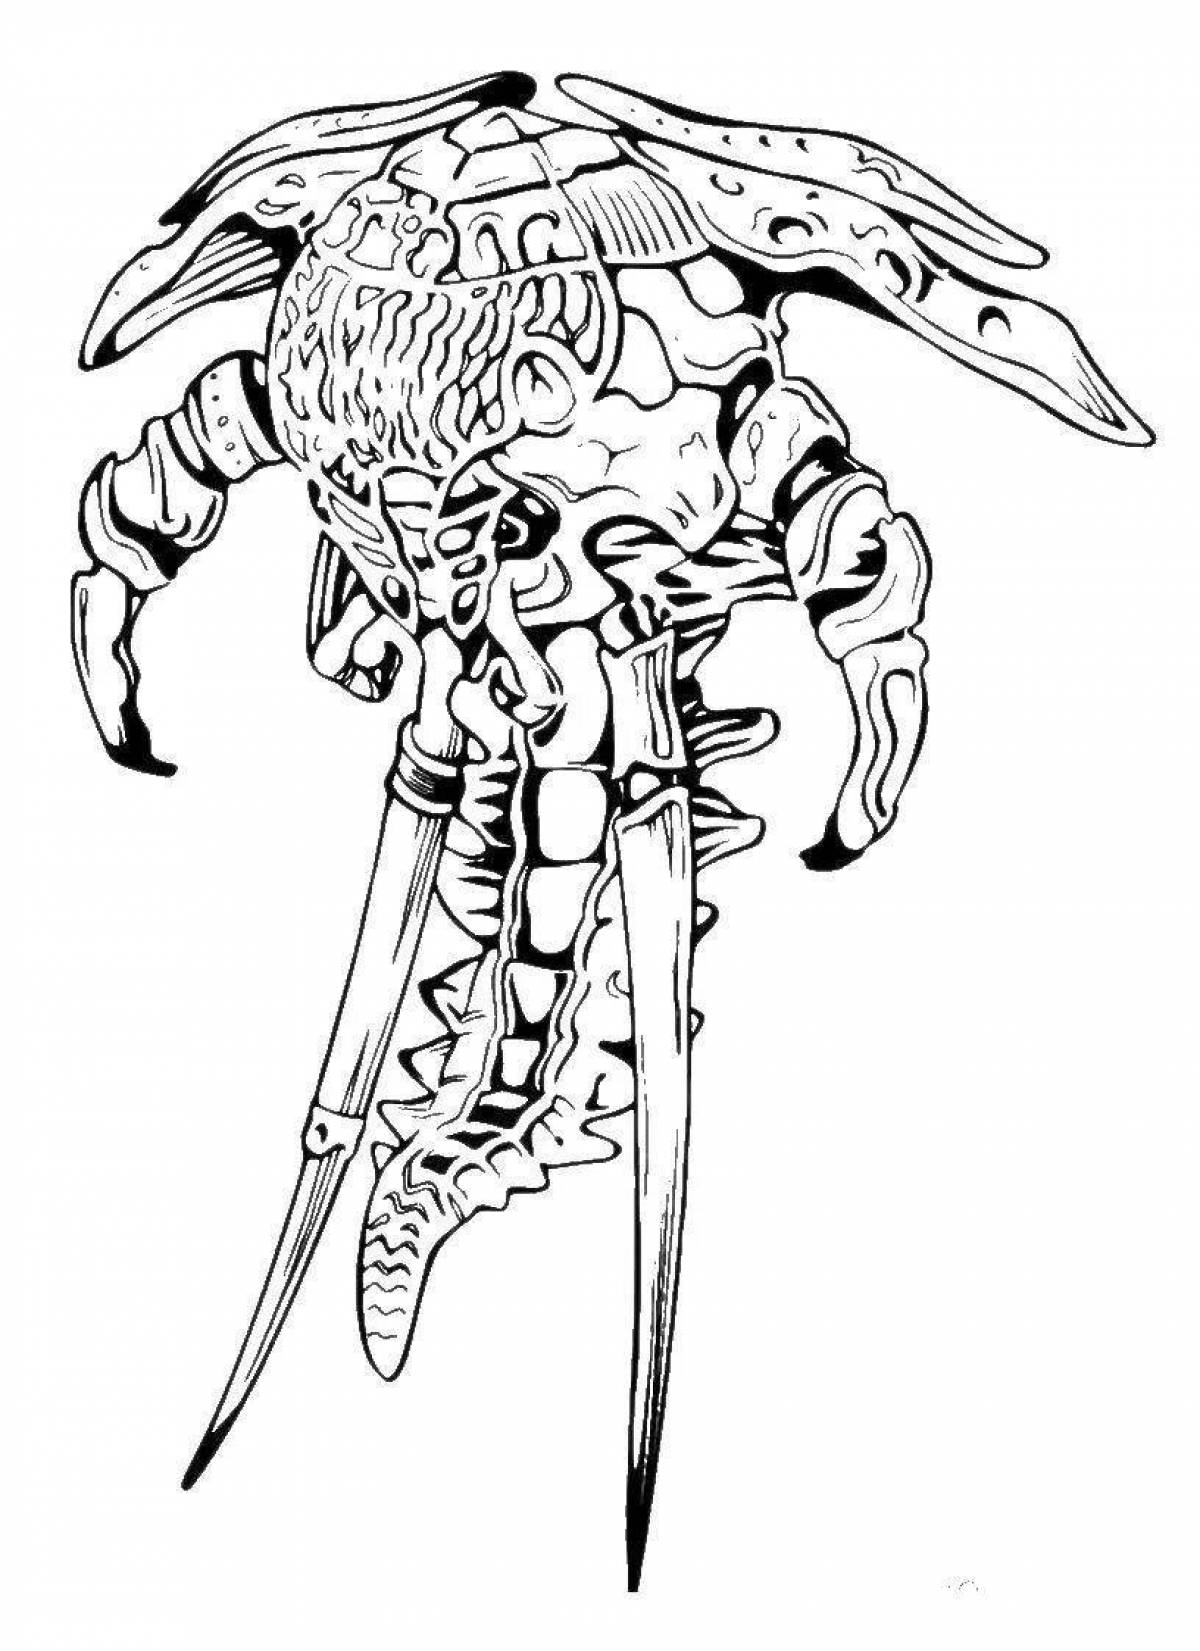 Incredible siren head robot coloring page